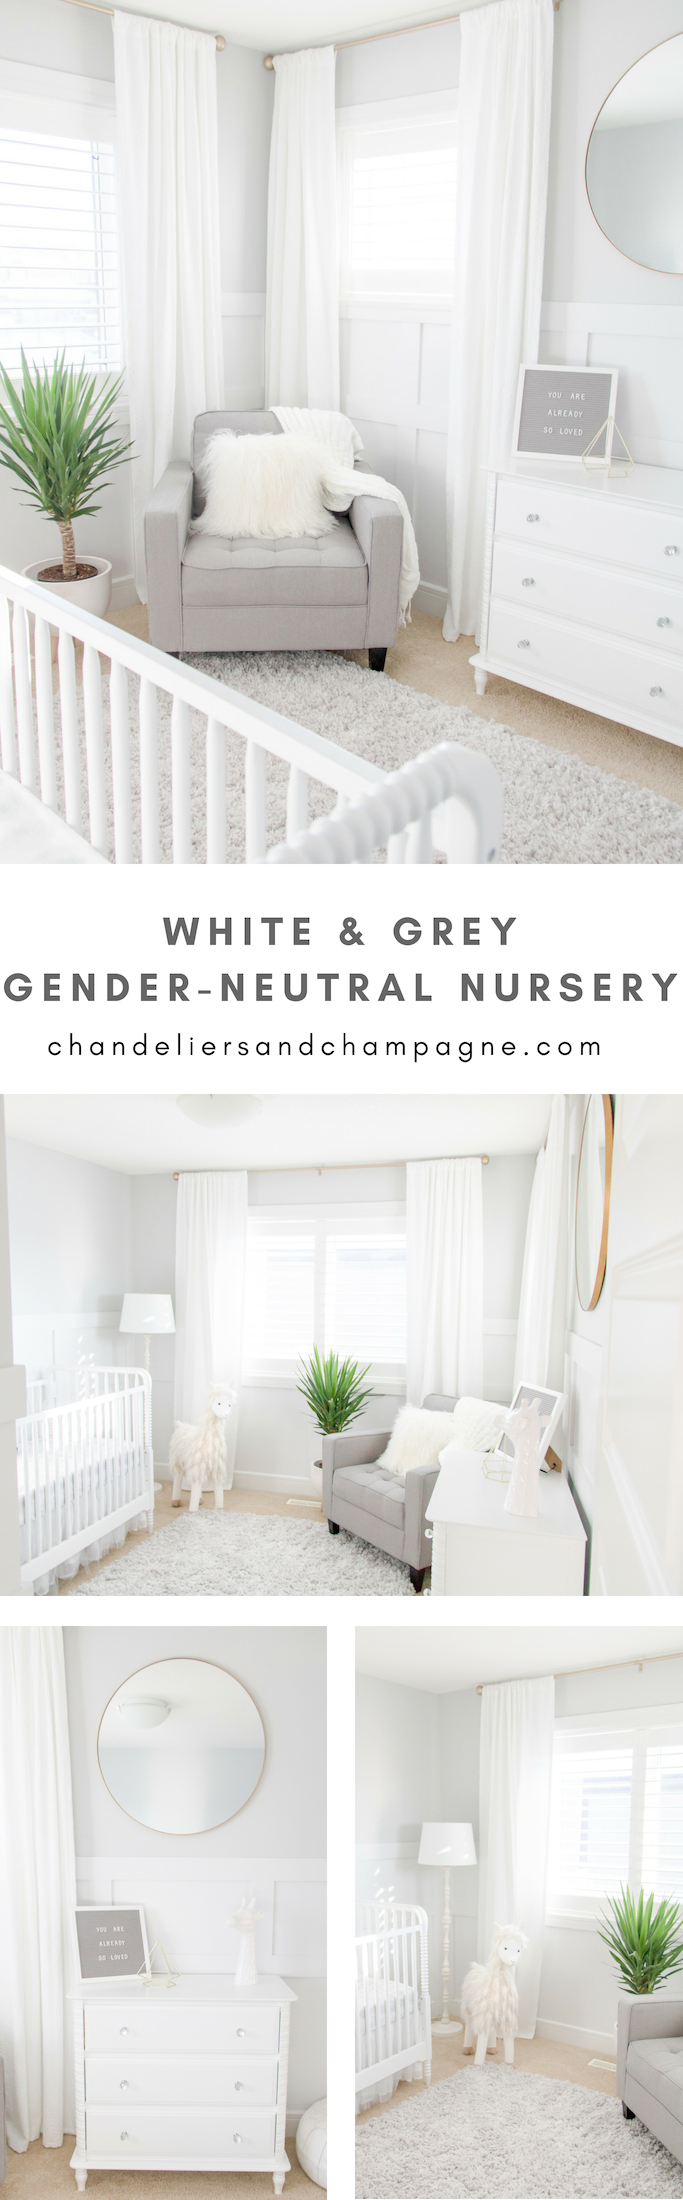 White and grey gender-neutral nursery inspiration - white and gray gender-neutral nursery with gold tone accents, white drapes, white crib and gray feeding chair